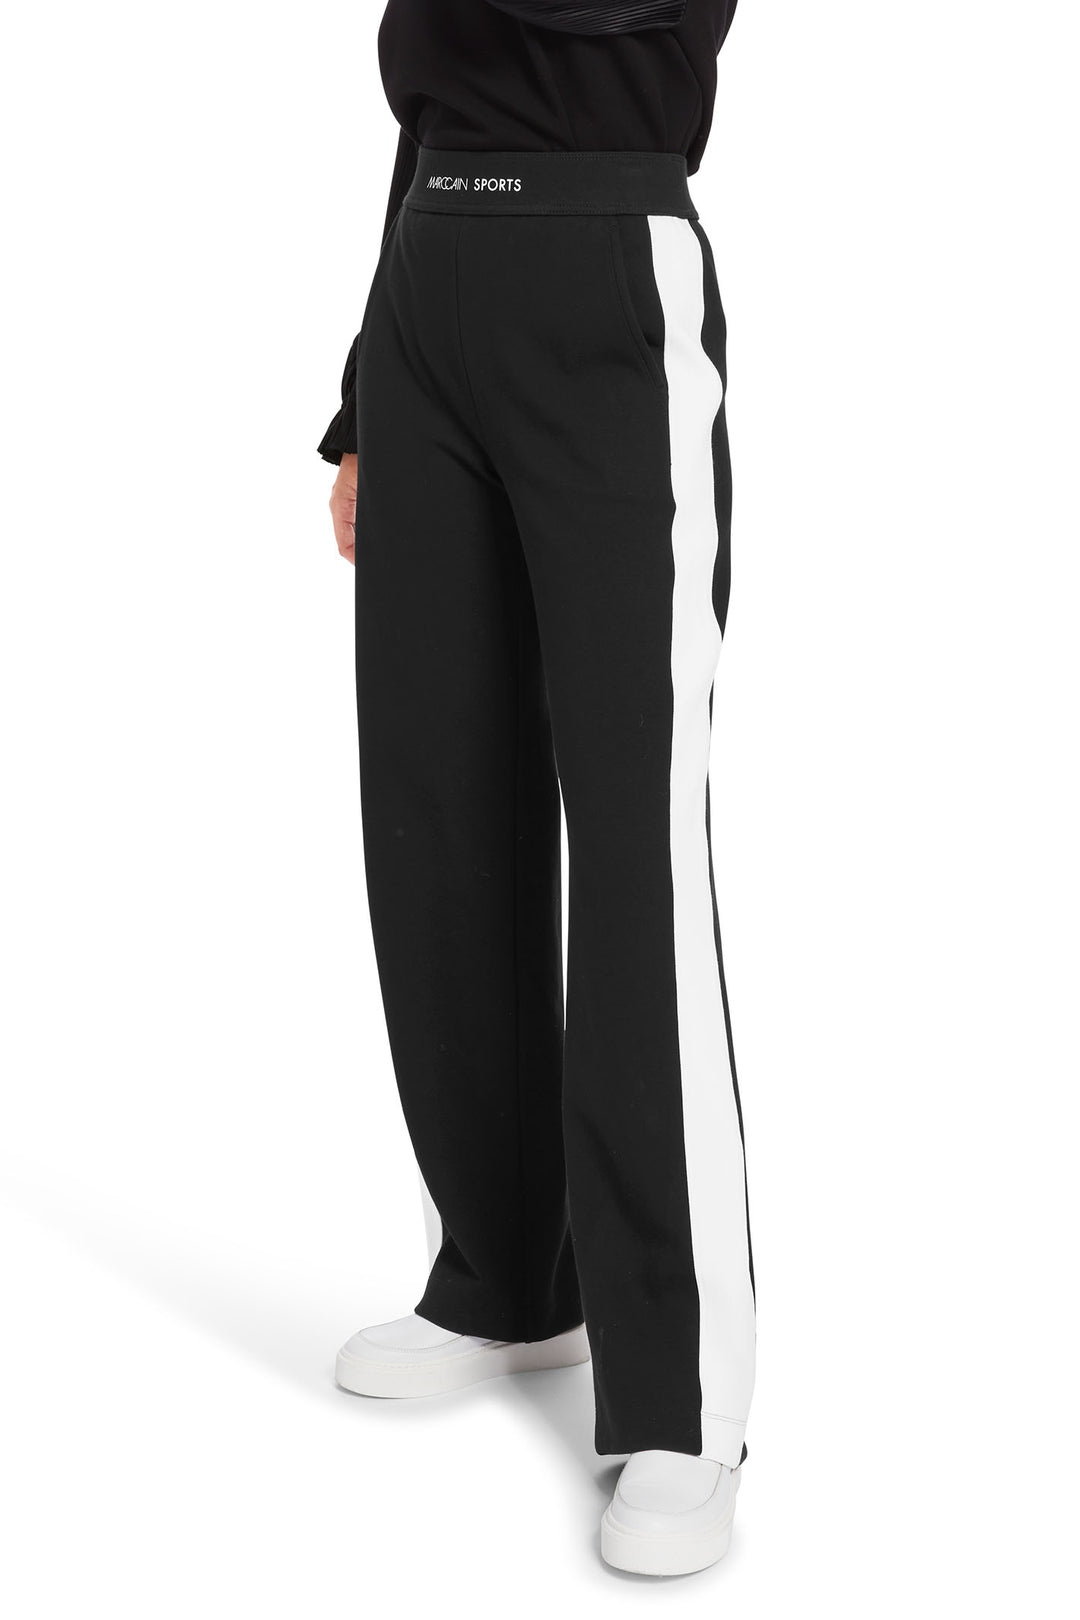 Marc Cain Sports Pull-On Trousers Black With Side Stripe XS 81.38 J09 900 - Olivia Grace Fashion